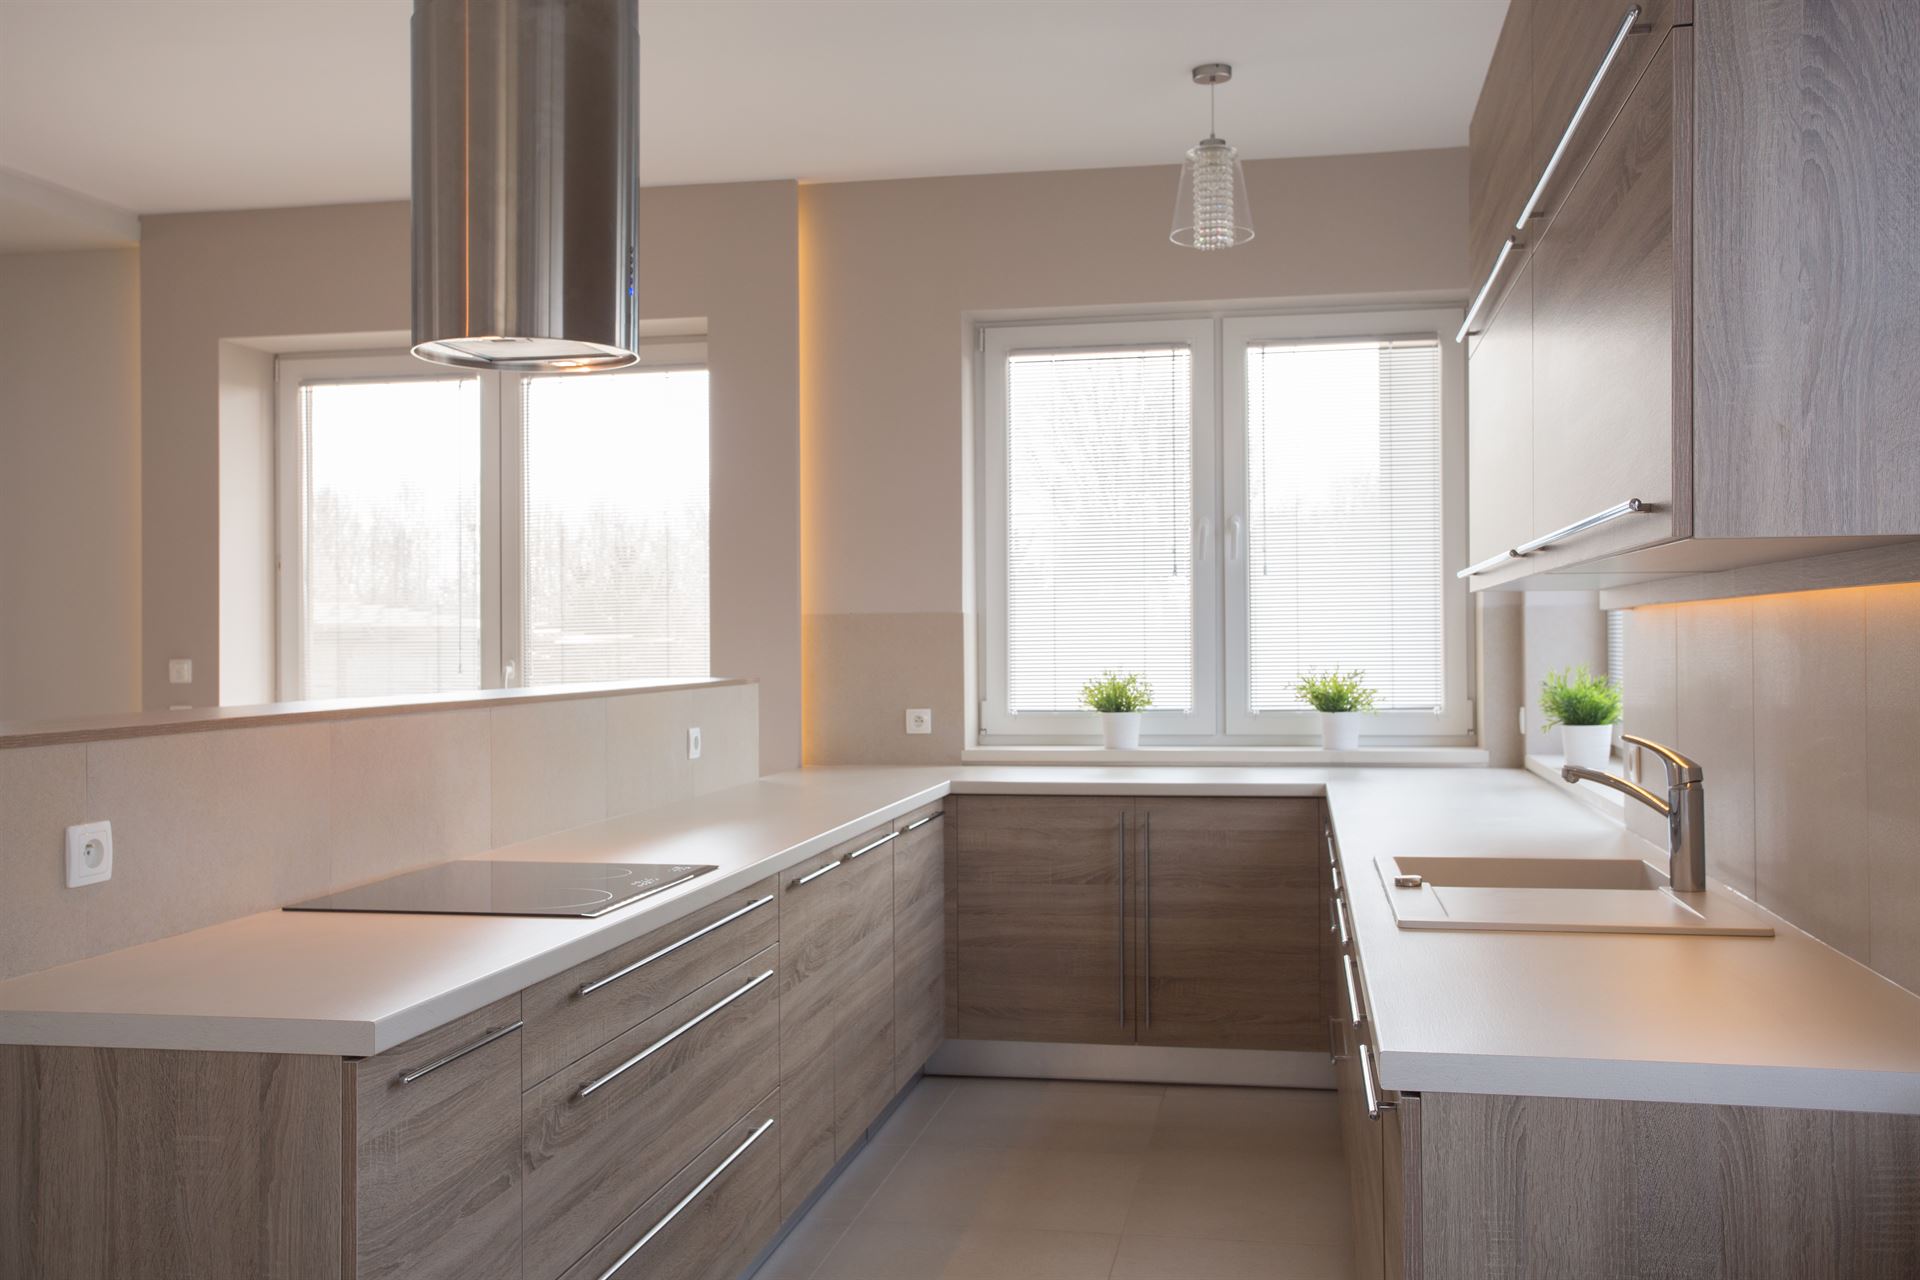 Picture of new style commodious kitchen in light colors